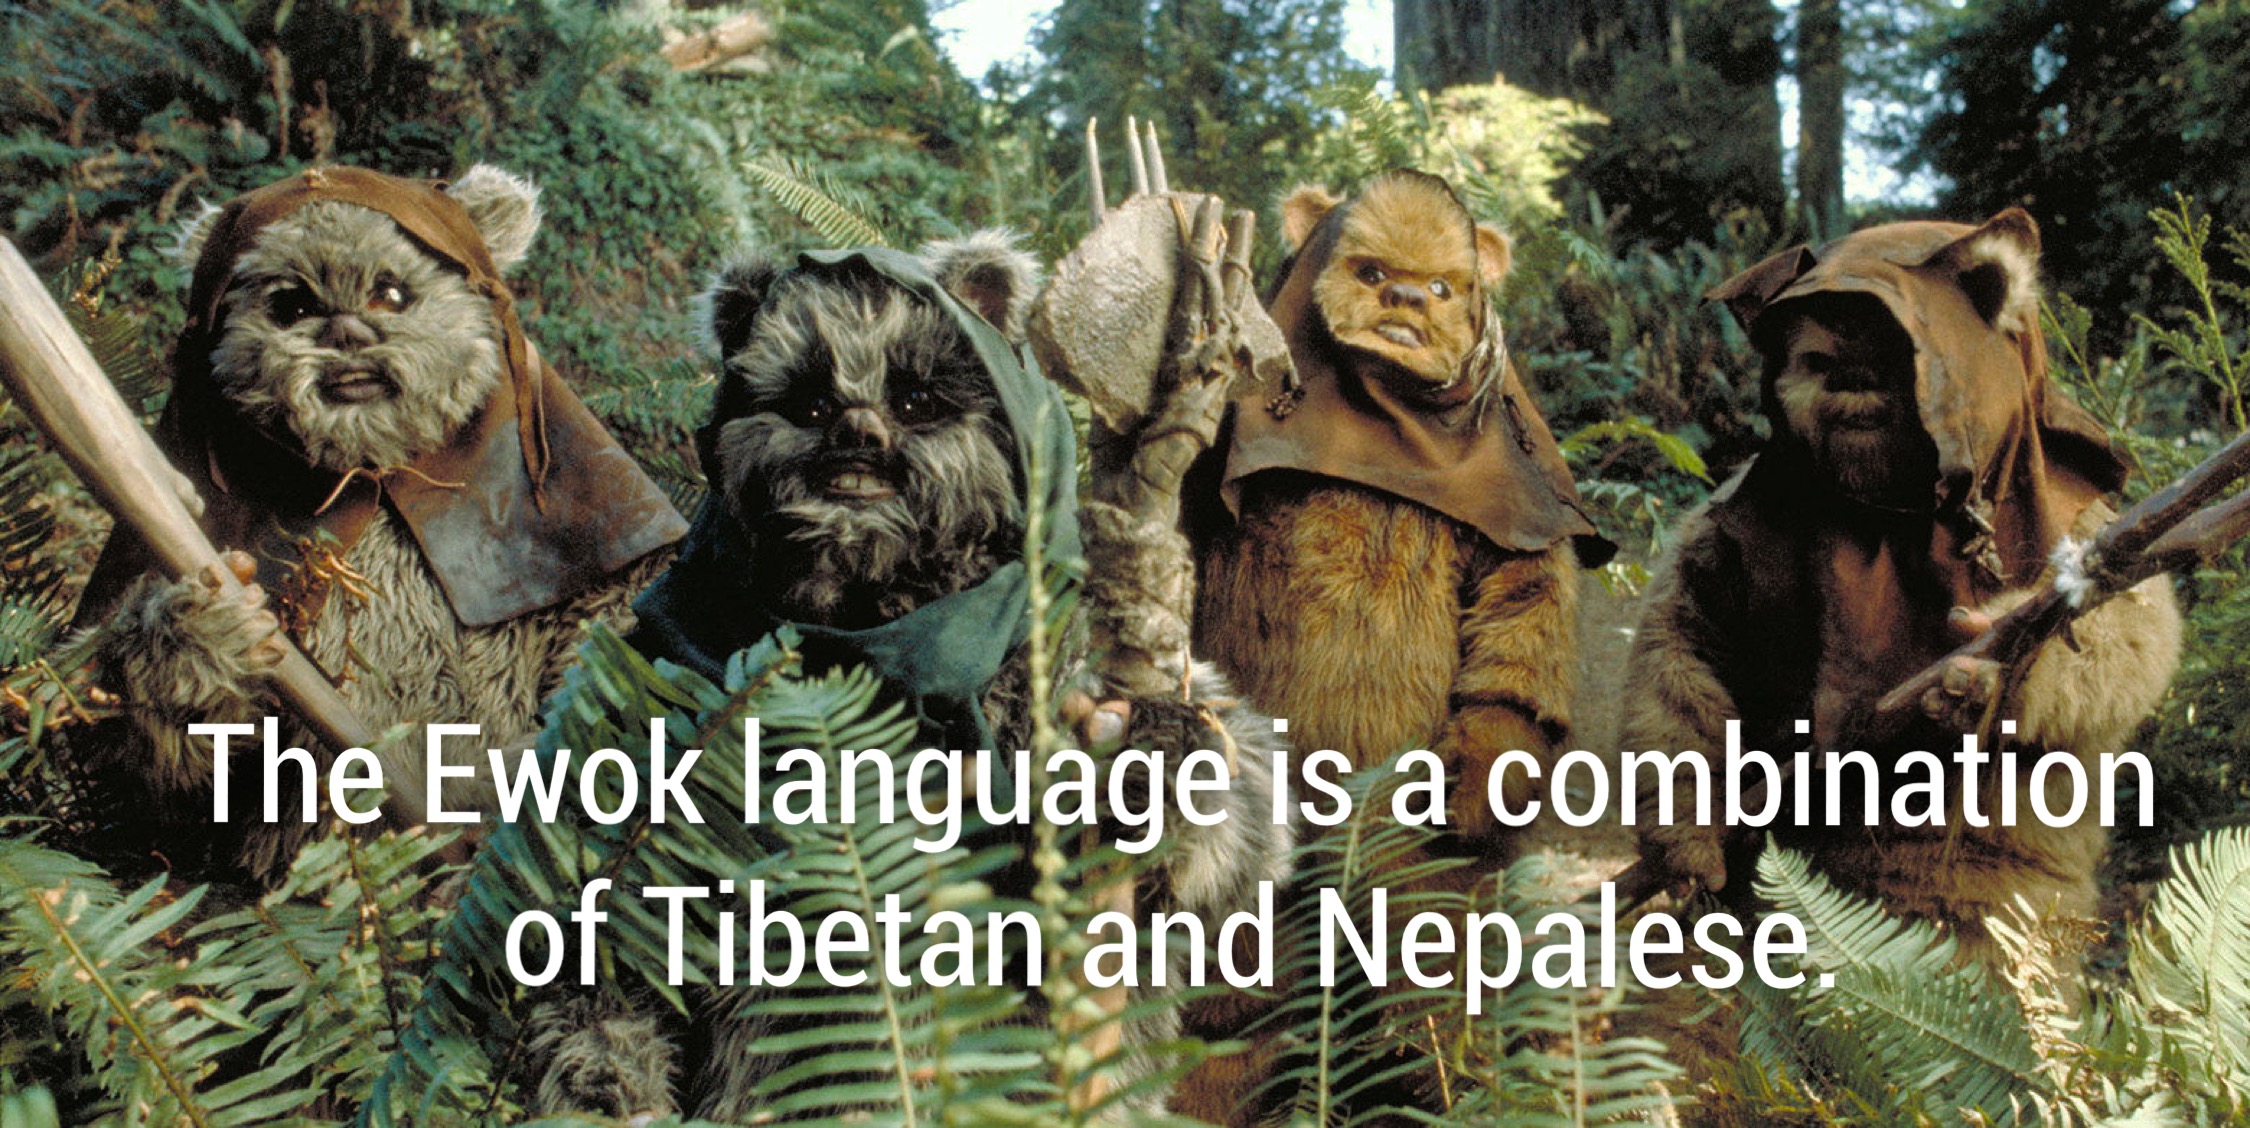 ewok star wars - The Ewok language is a combination of Tibetan and Nepalese,